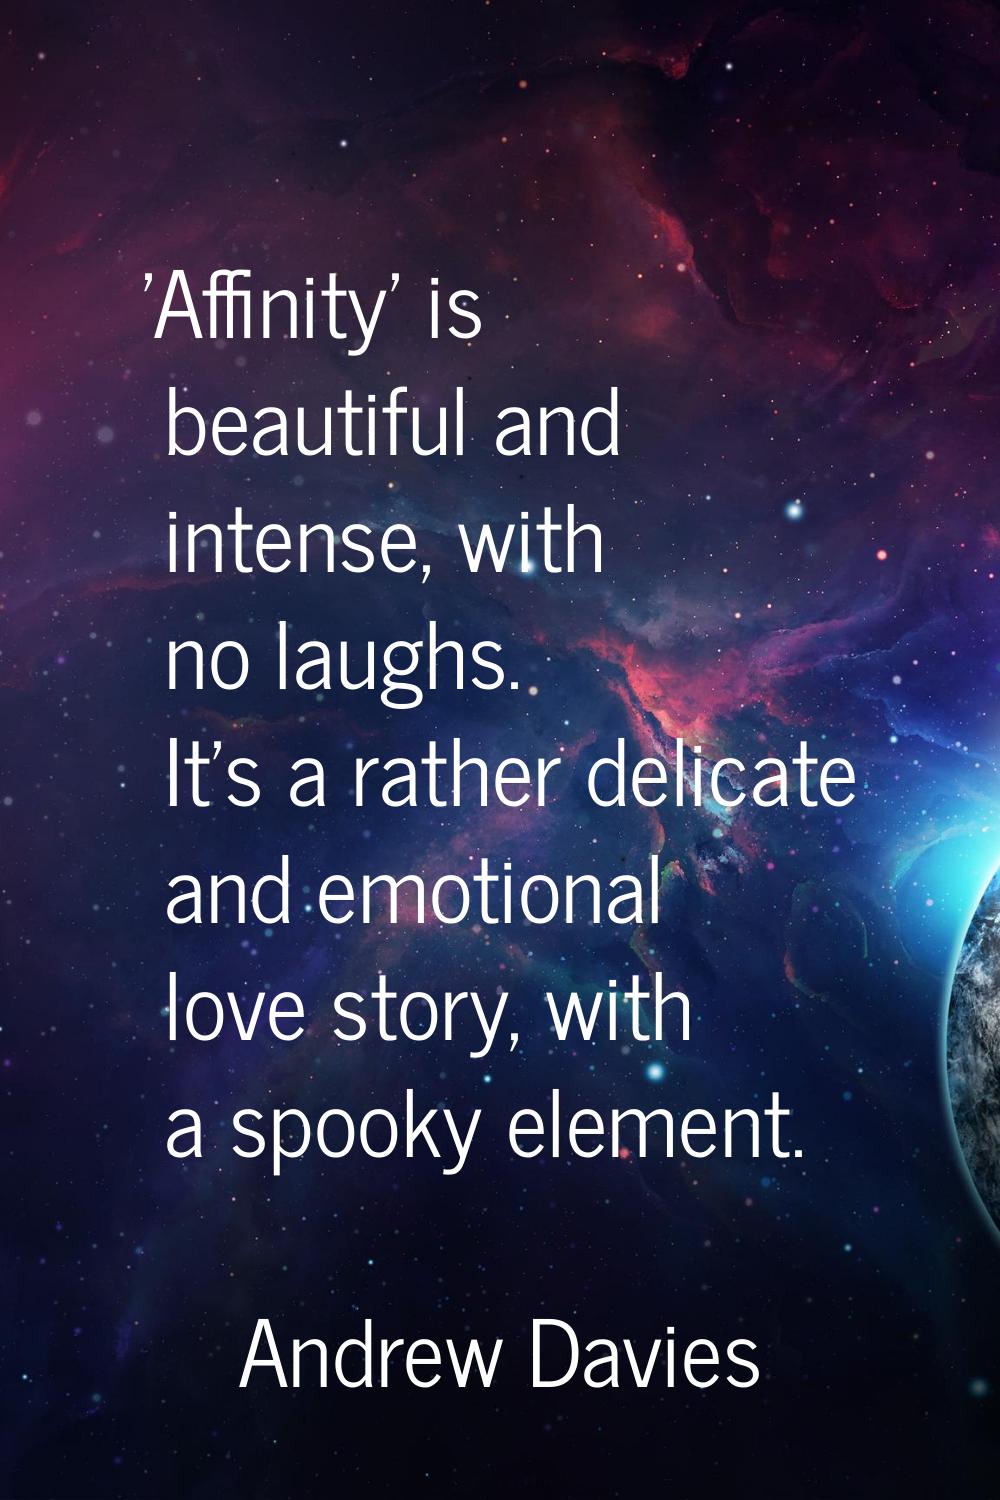 'Affinity' is beautiful and intense, with no laughs. It's a rather delicate and emotional love stor